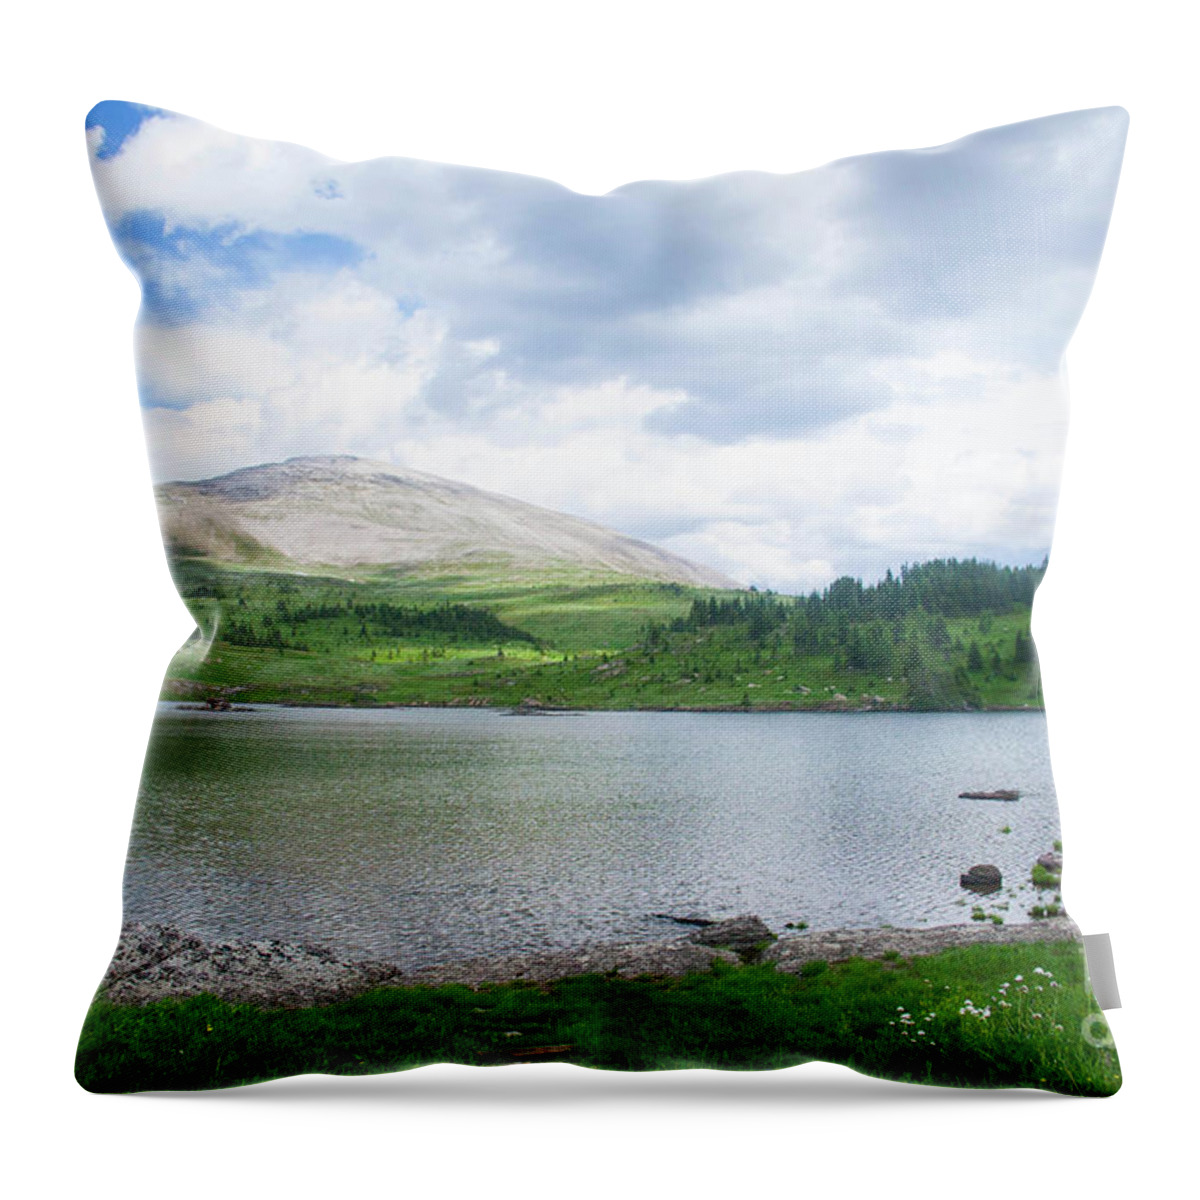 #nature #print #photography #fineart #cloud #sky #art #images #alberta Throw Pillow featuring the photograph Nature Unfolding by Jacquelinemari